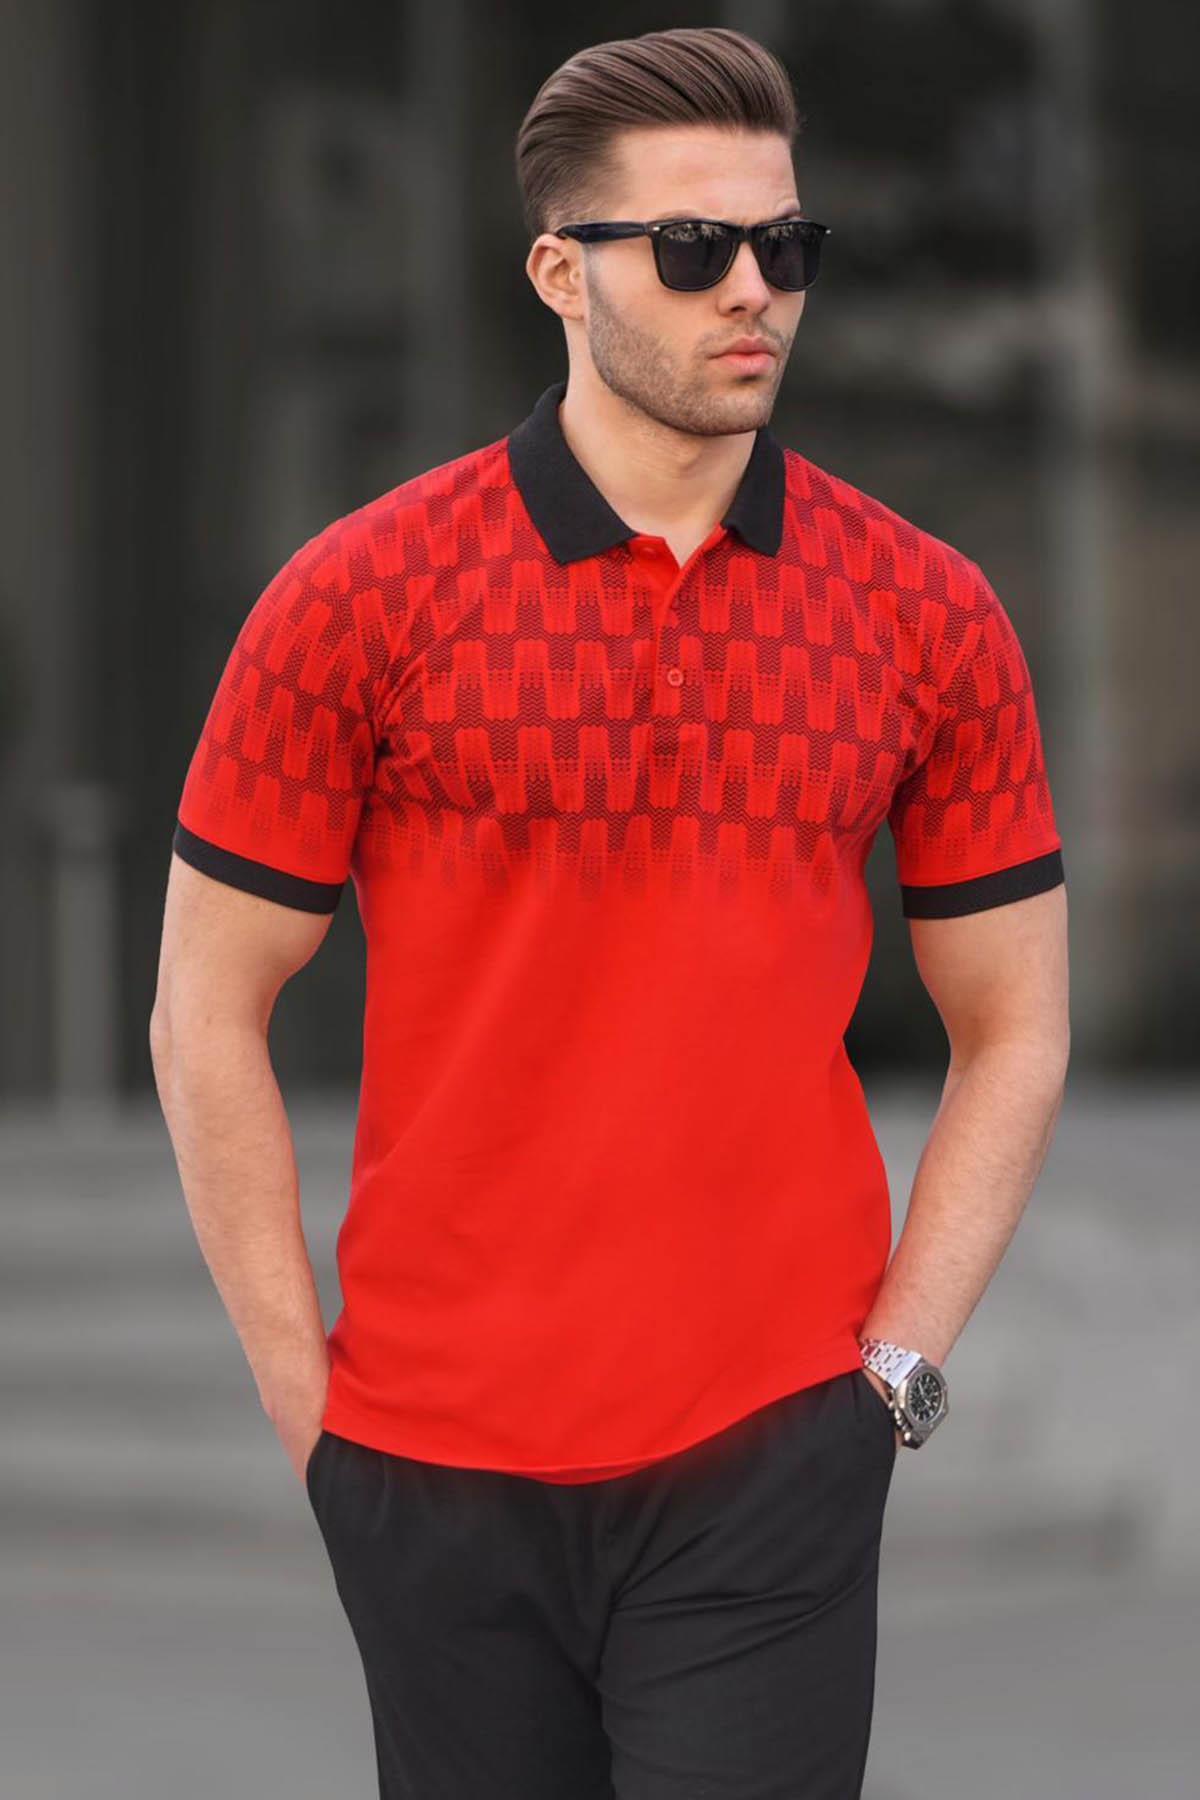 Madmext Men's Red Slim Fit Patterned Polo T-Shirt 6109